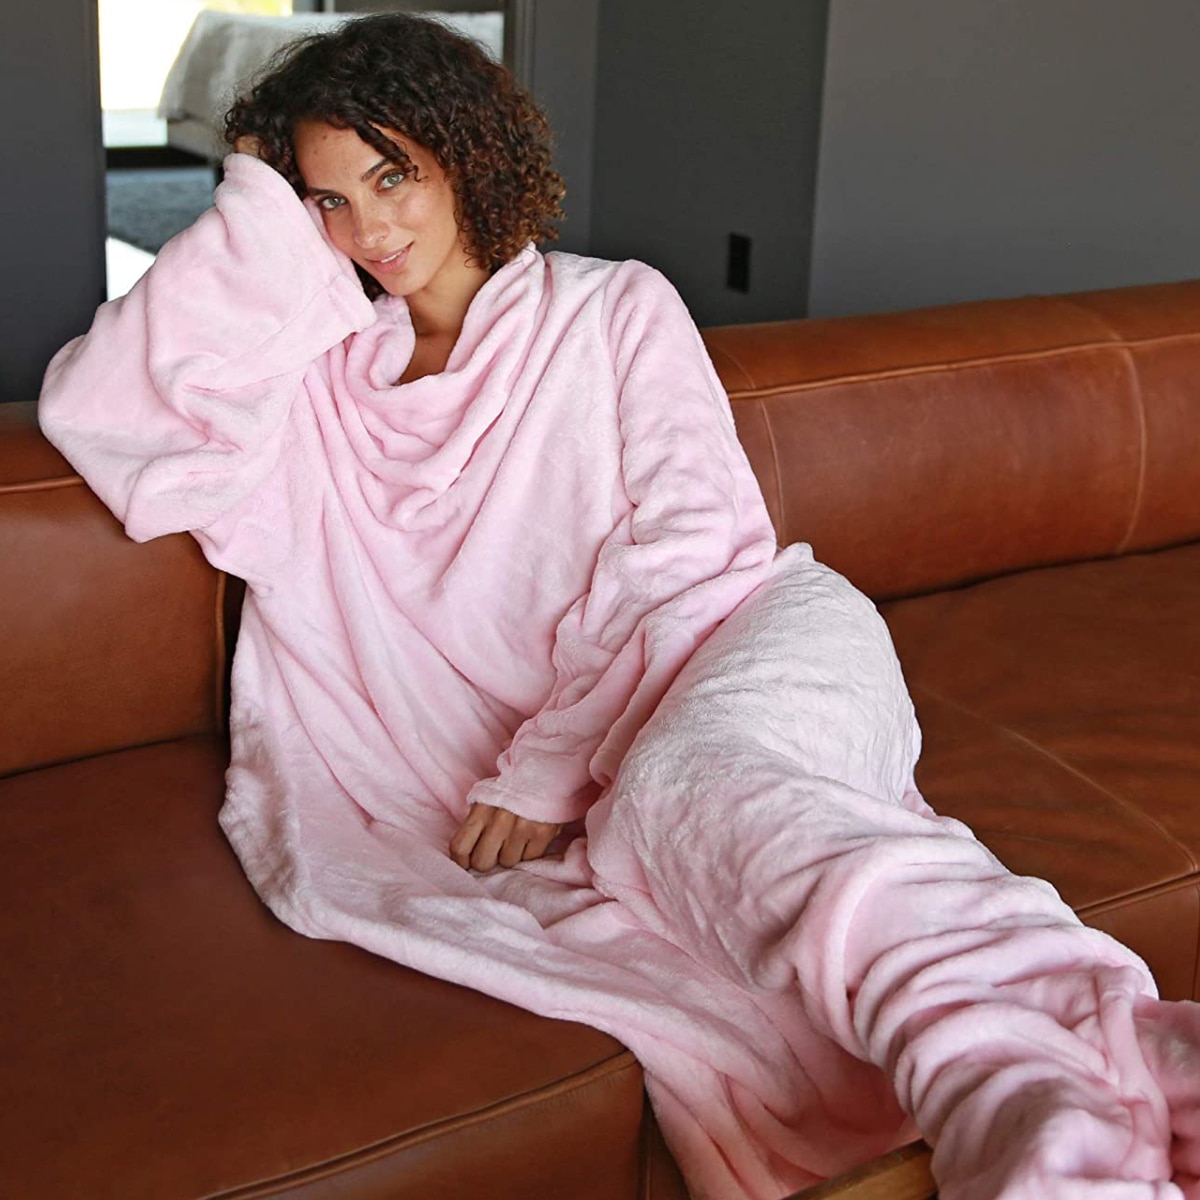 https://akns-images.eonline.com/eol_images/Entire_Site/20221014/rs_1200x1200-221114143715-wearable-blanket-1200-.jpg